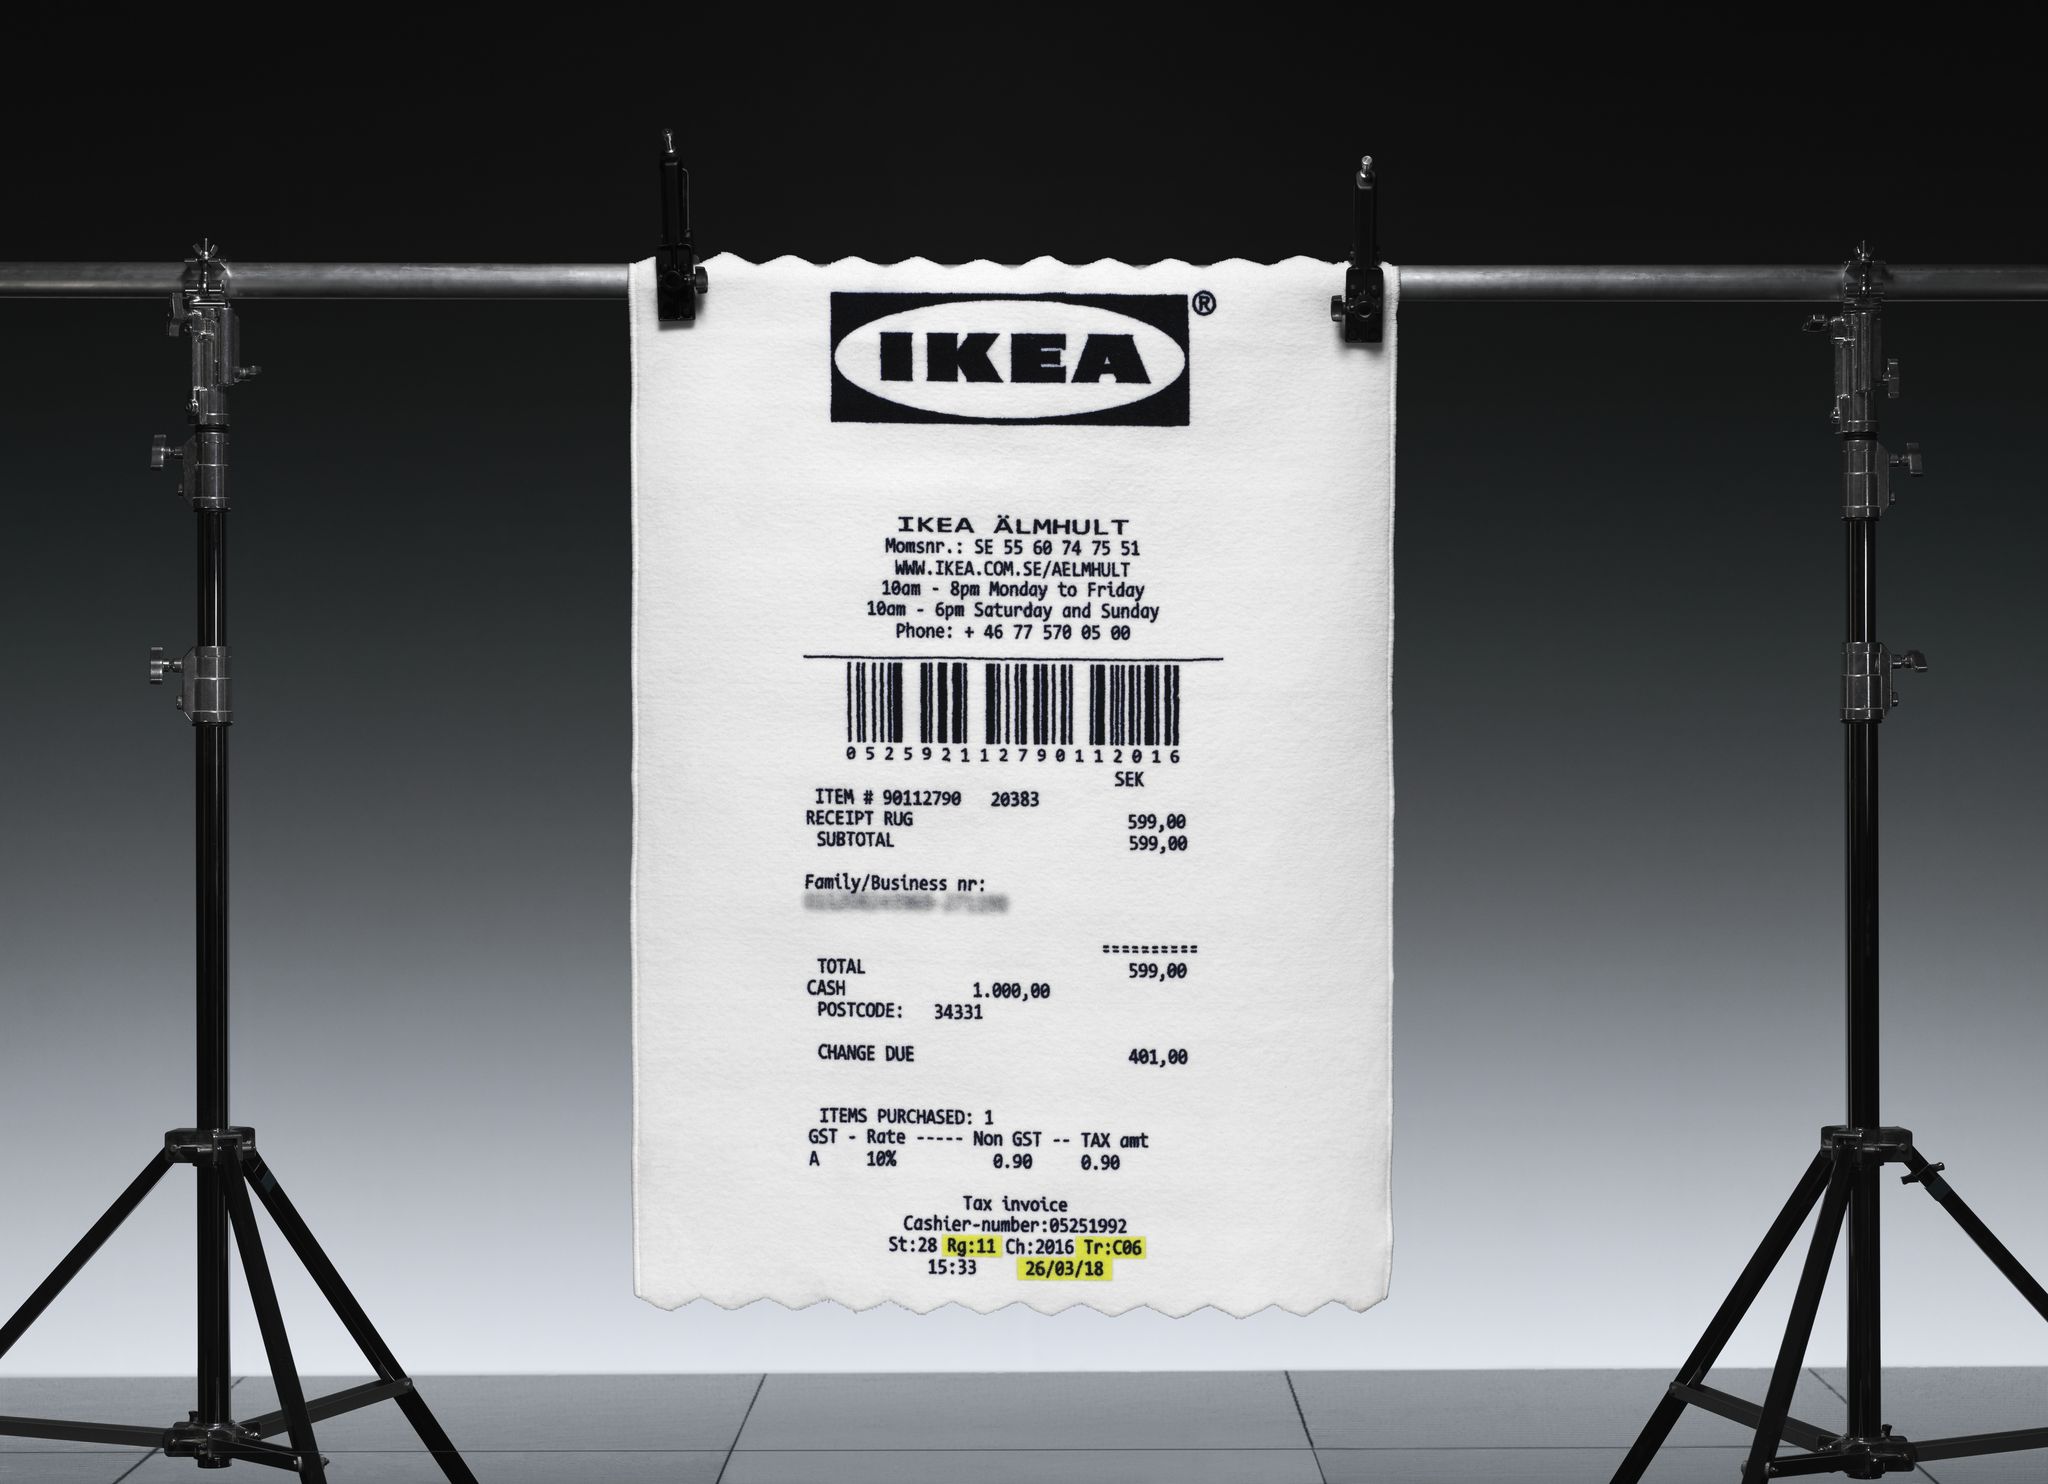 What we know about Virgil Abloh x IKEA collab